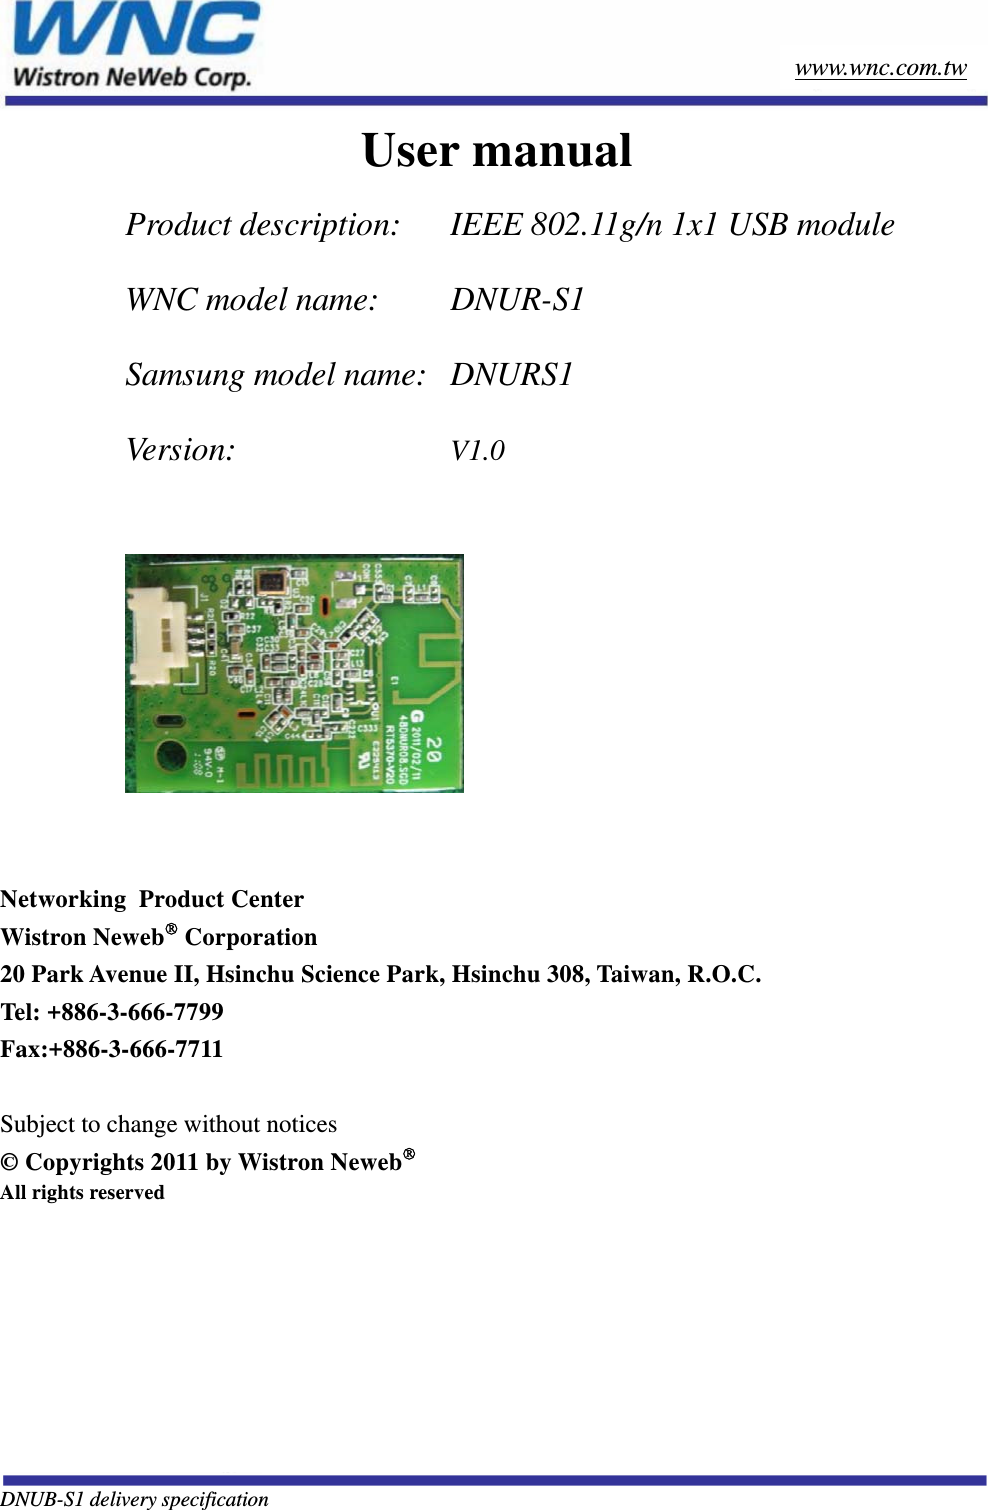   DNUB-S1 delivery specification        www.wnc.com.tw User manual  Product description:   IEEE 802.11g/n 1x1 USB module WNC model name:    DNUR-S1 Samsung model name:   DNURS1 Version:      V1.0     Networking  Product Center Wistron Neweb Corporation 20 Park Avenue II, Hsinchu Science Park, Hsinchu 308, Taiwan, R.O.C. Tel: +886-3-666-7799 Fax:+886-3-666-7711  Subject to change without notices © Copyrights 2011 by Wistron Neweb All rights reserved 